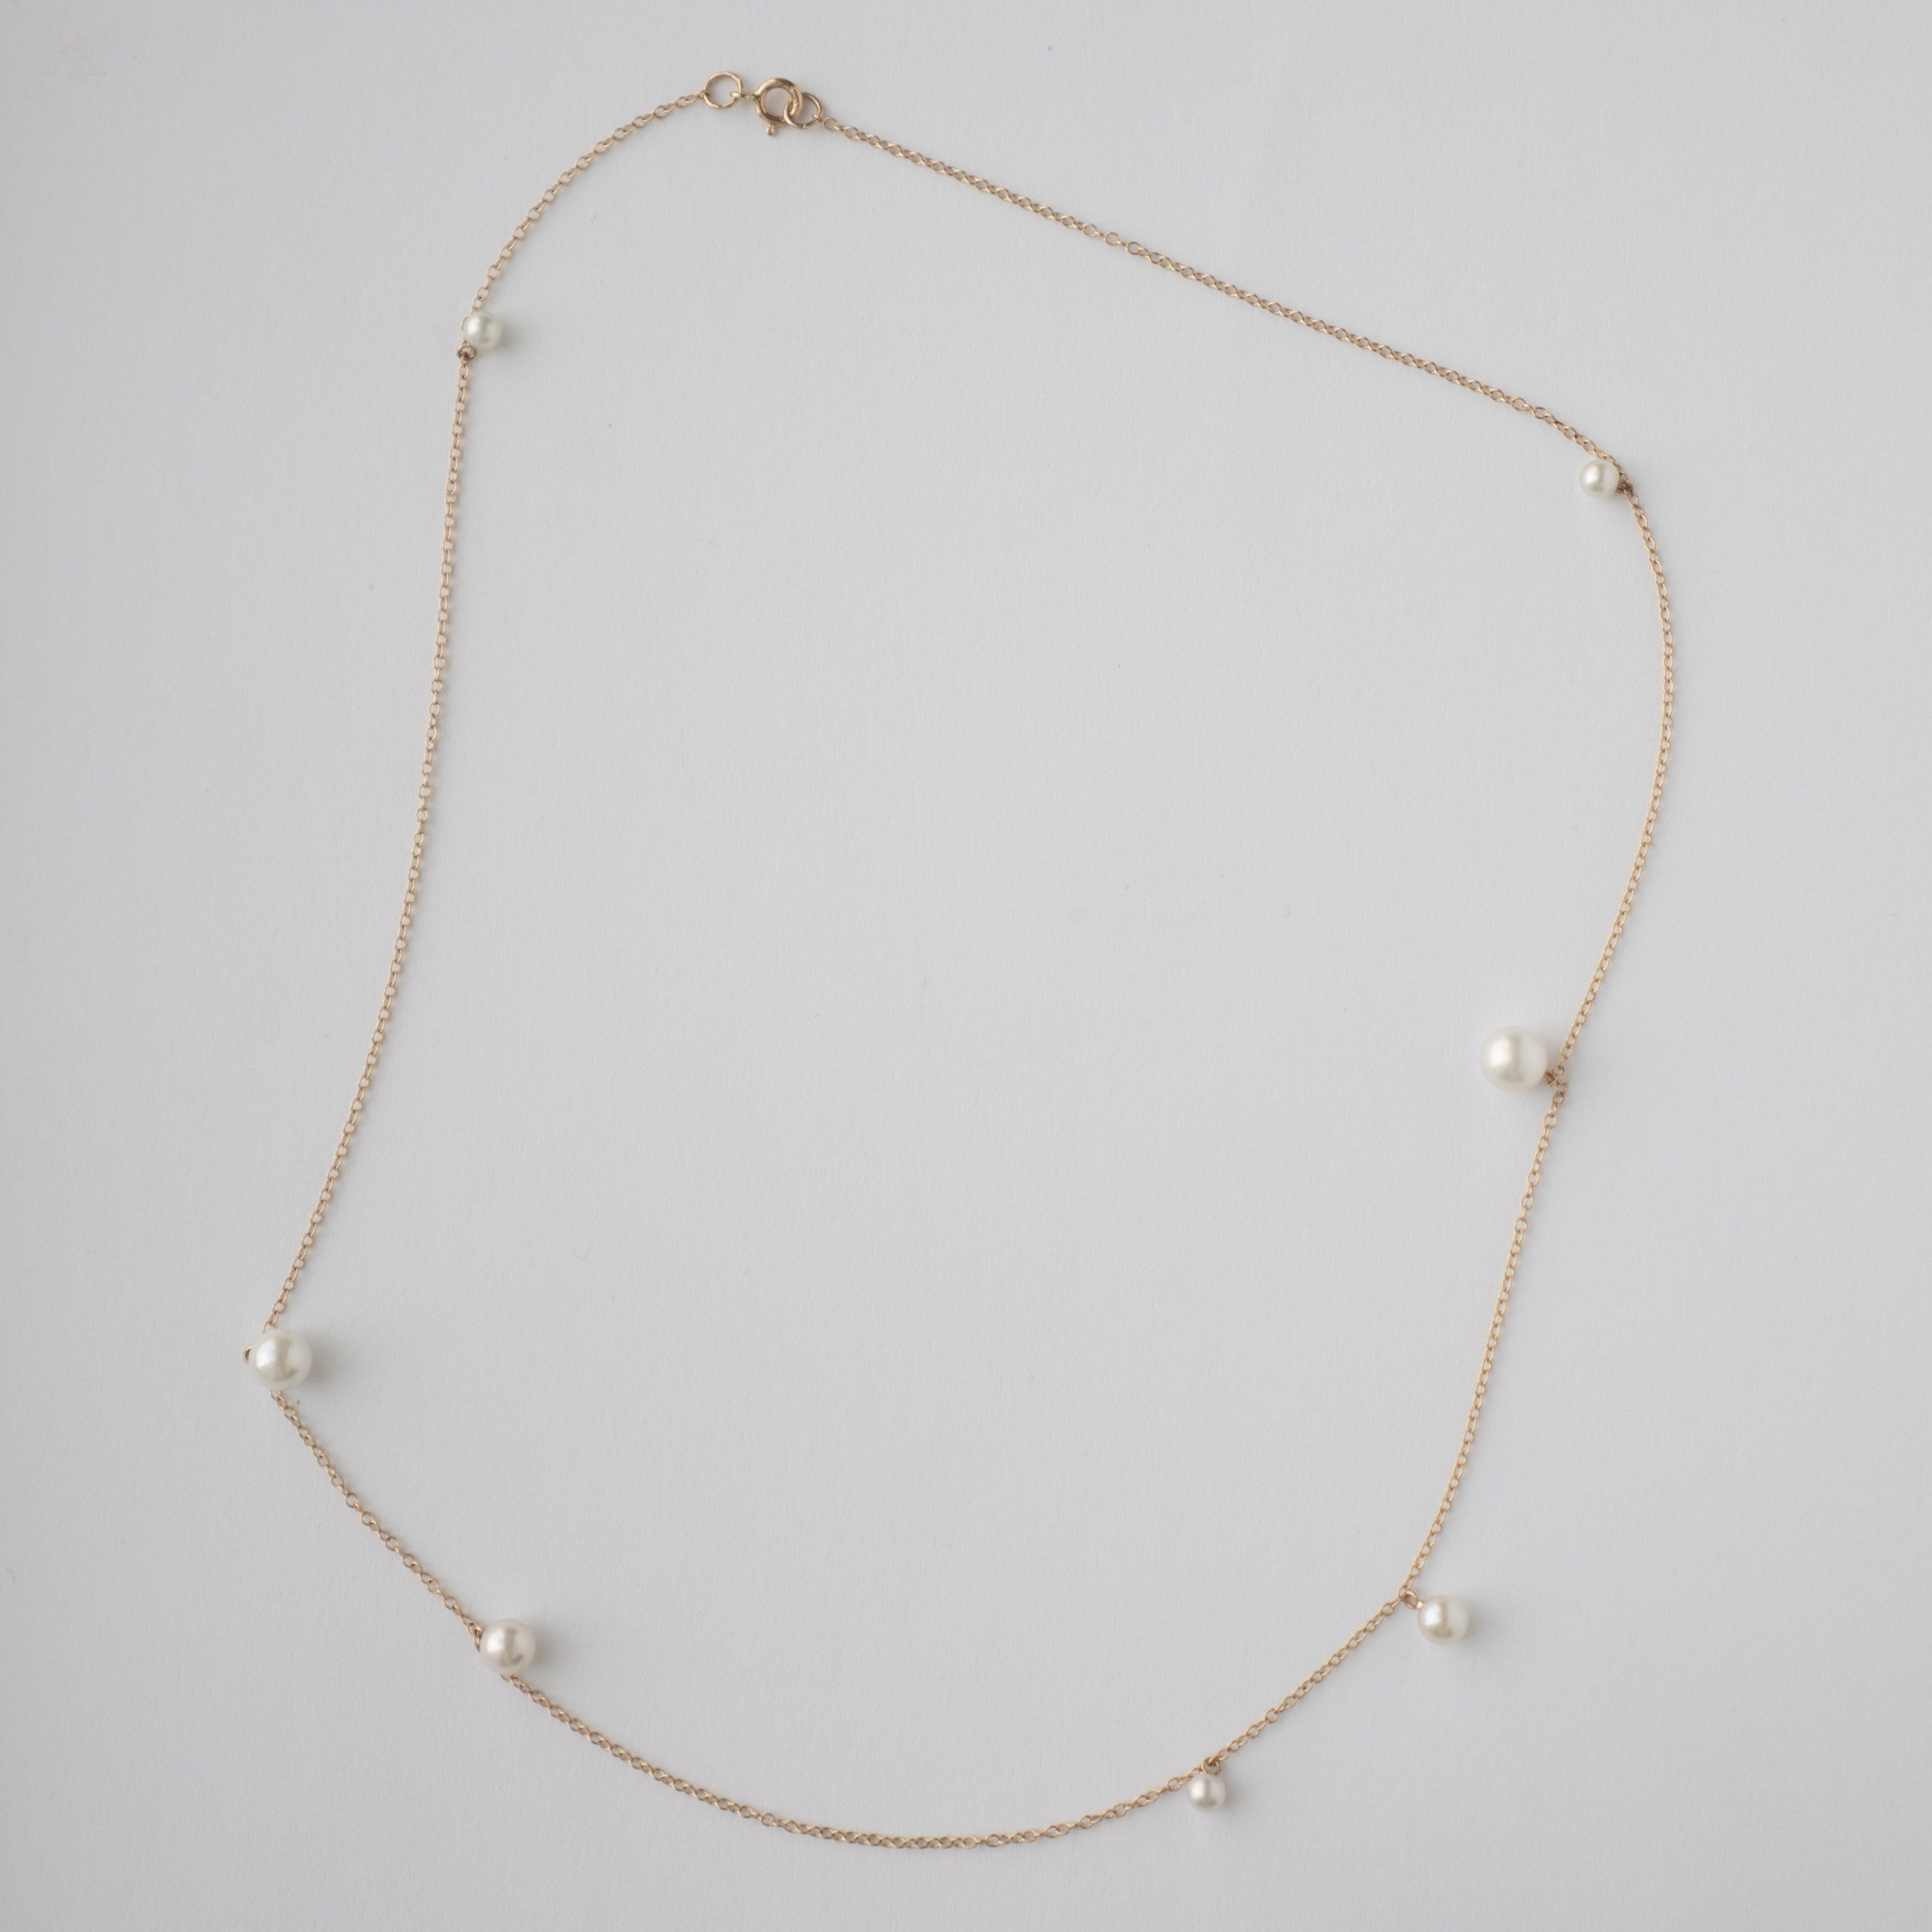 Unique RIti choker in 14k yellow gold with pearls made in NYC by SHW fine Jewelry